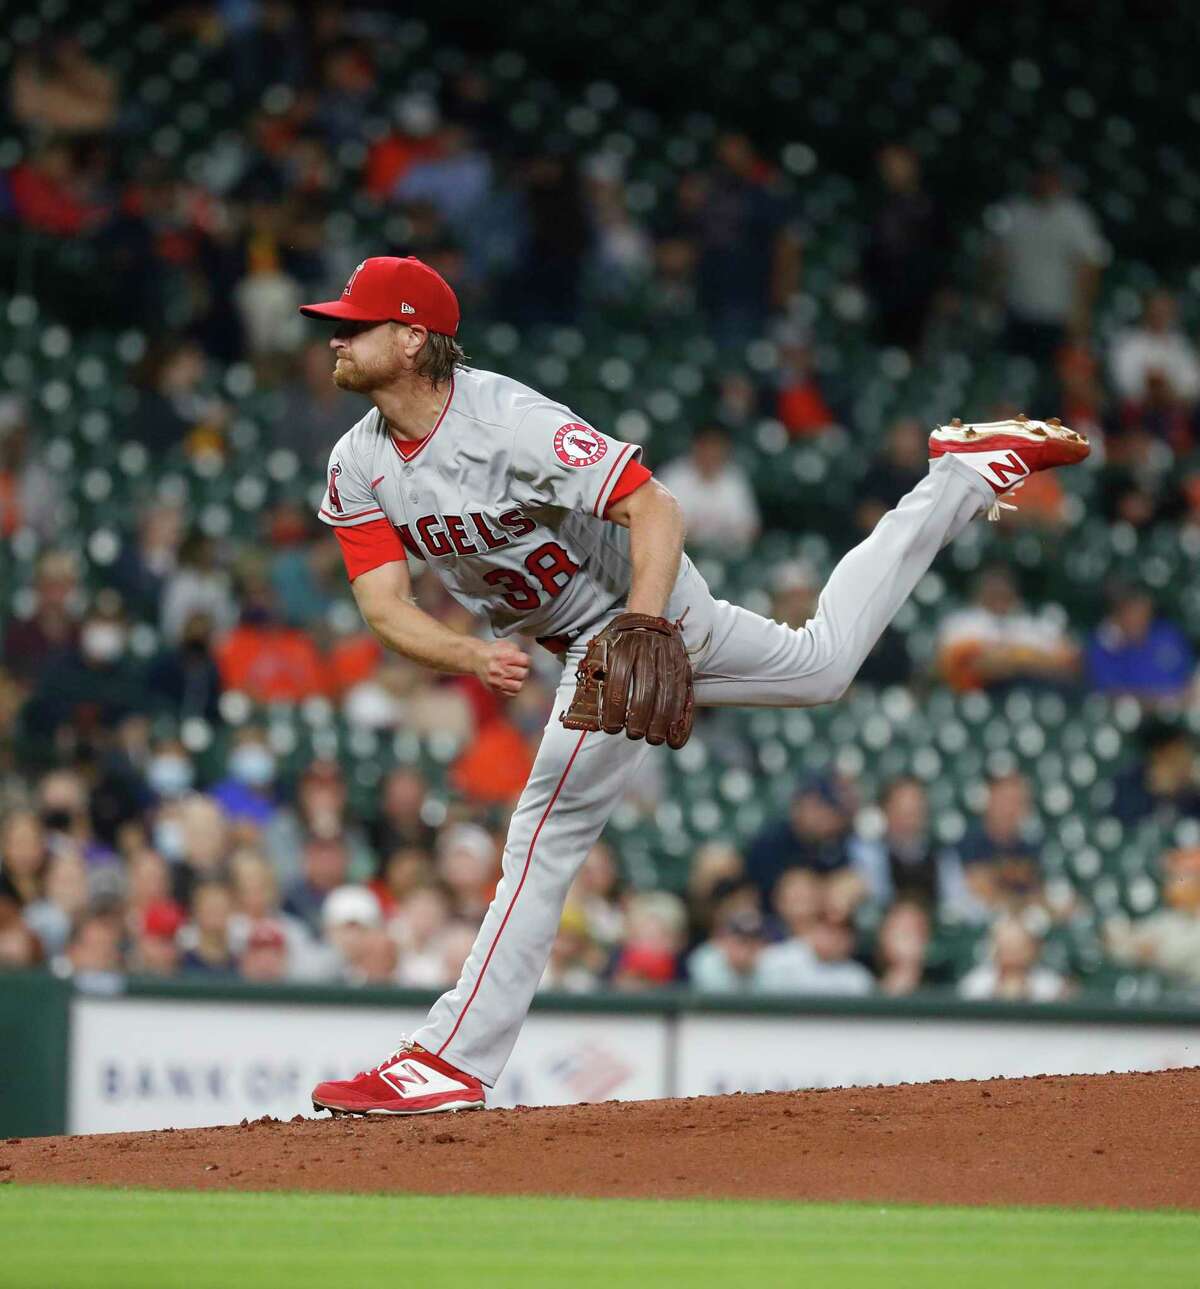 Los Angeles Angels starting pitcher Alex Cobb (38) pitches during the first inning of an MLB baseball game at Minute Maid Park, Thursday, April 22, 2021, in Houston.